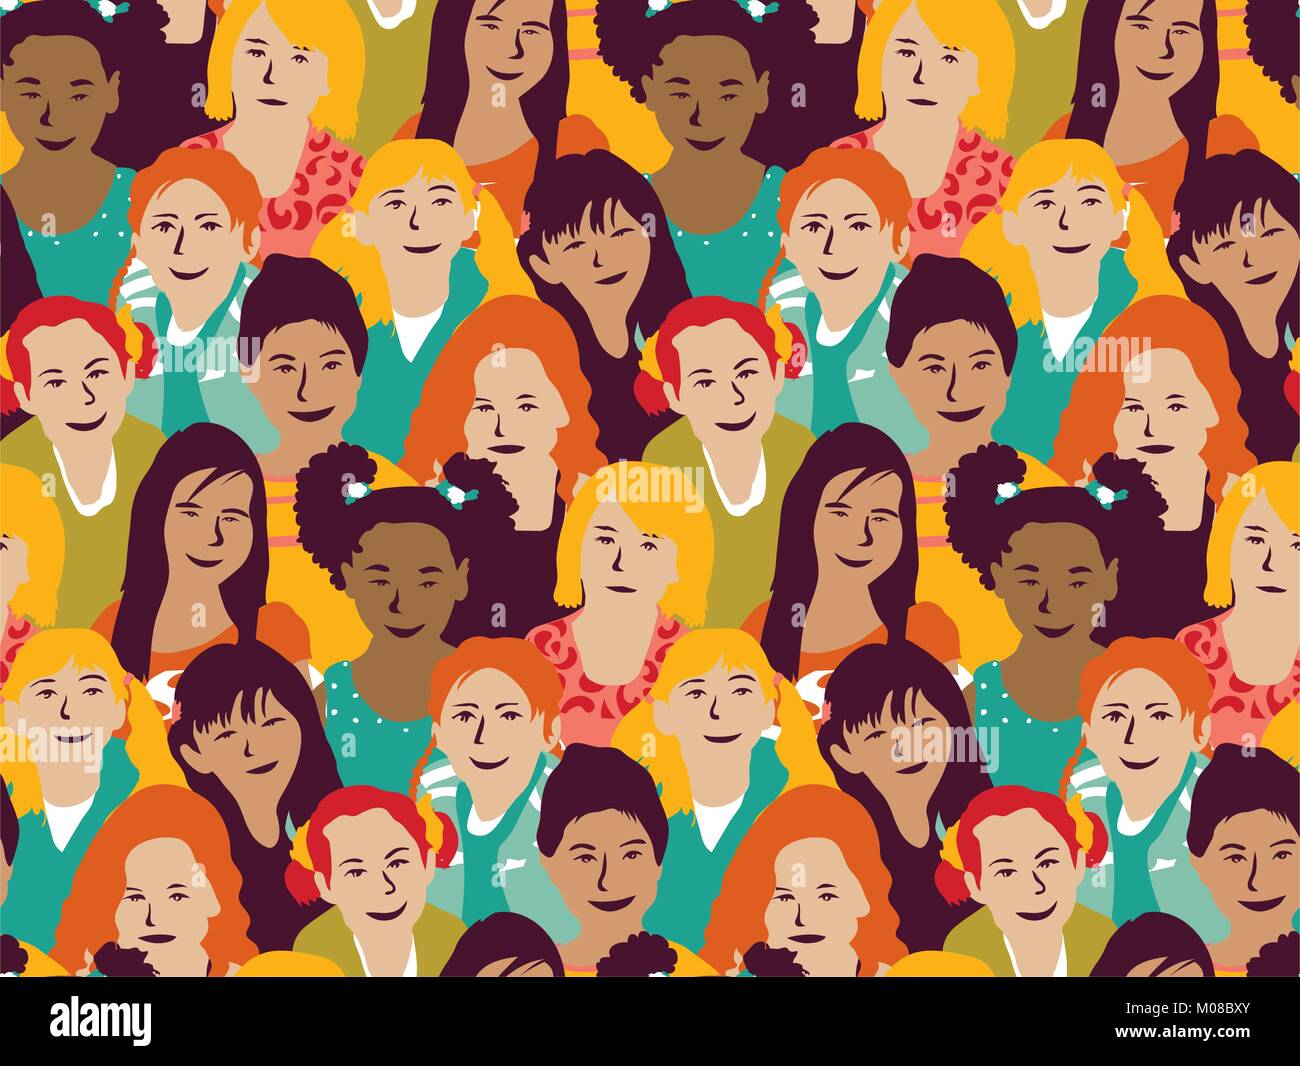 Girls group and crowd seamless pattern. Stock Vector